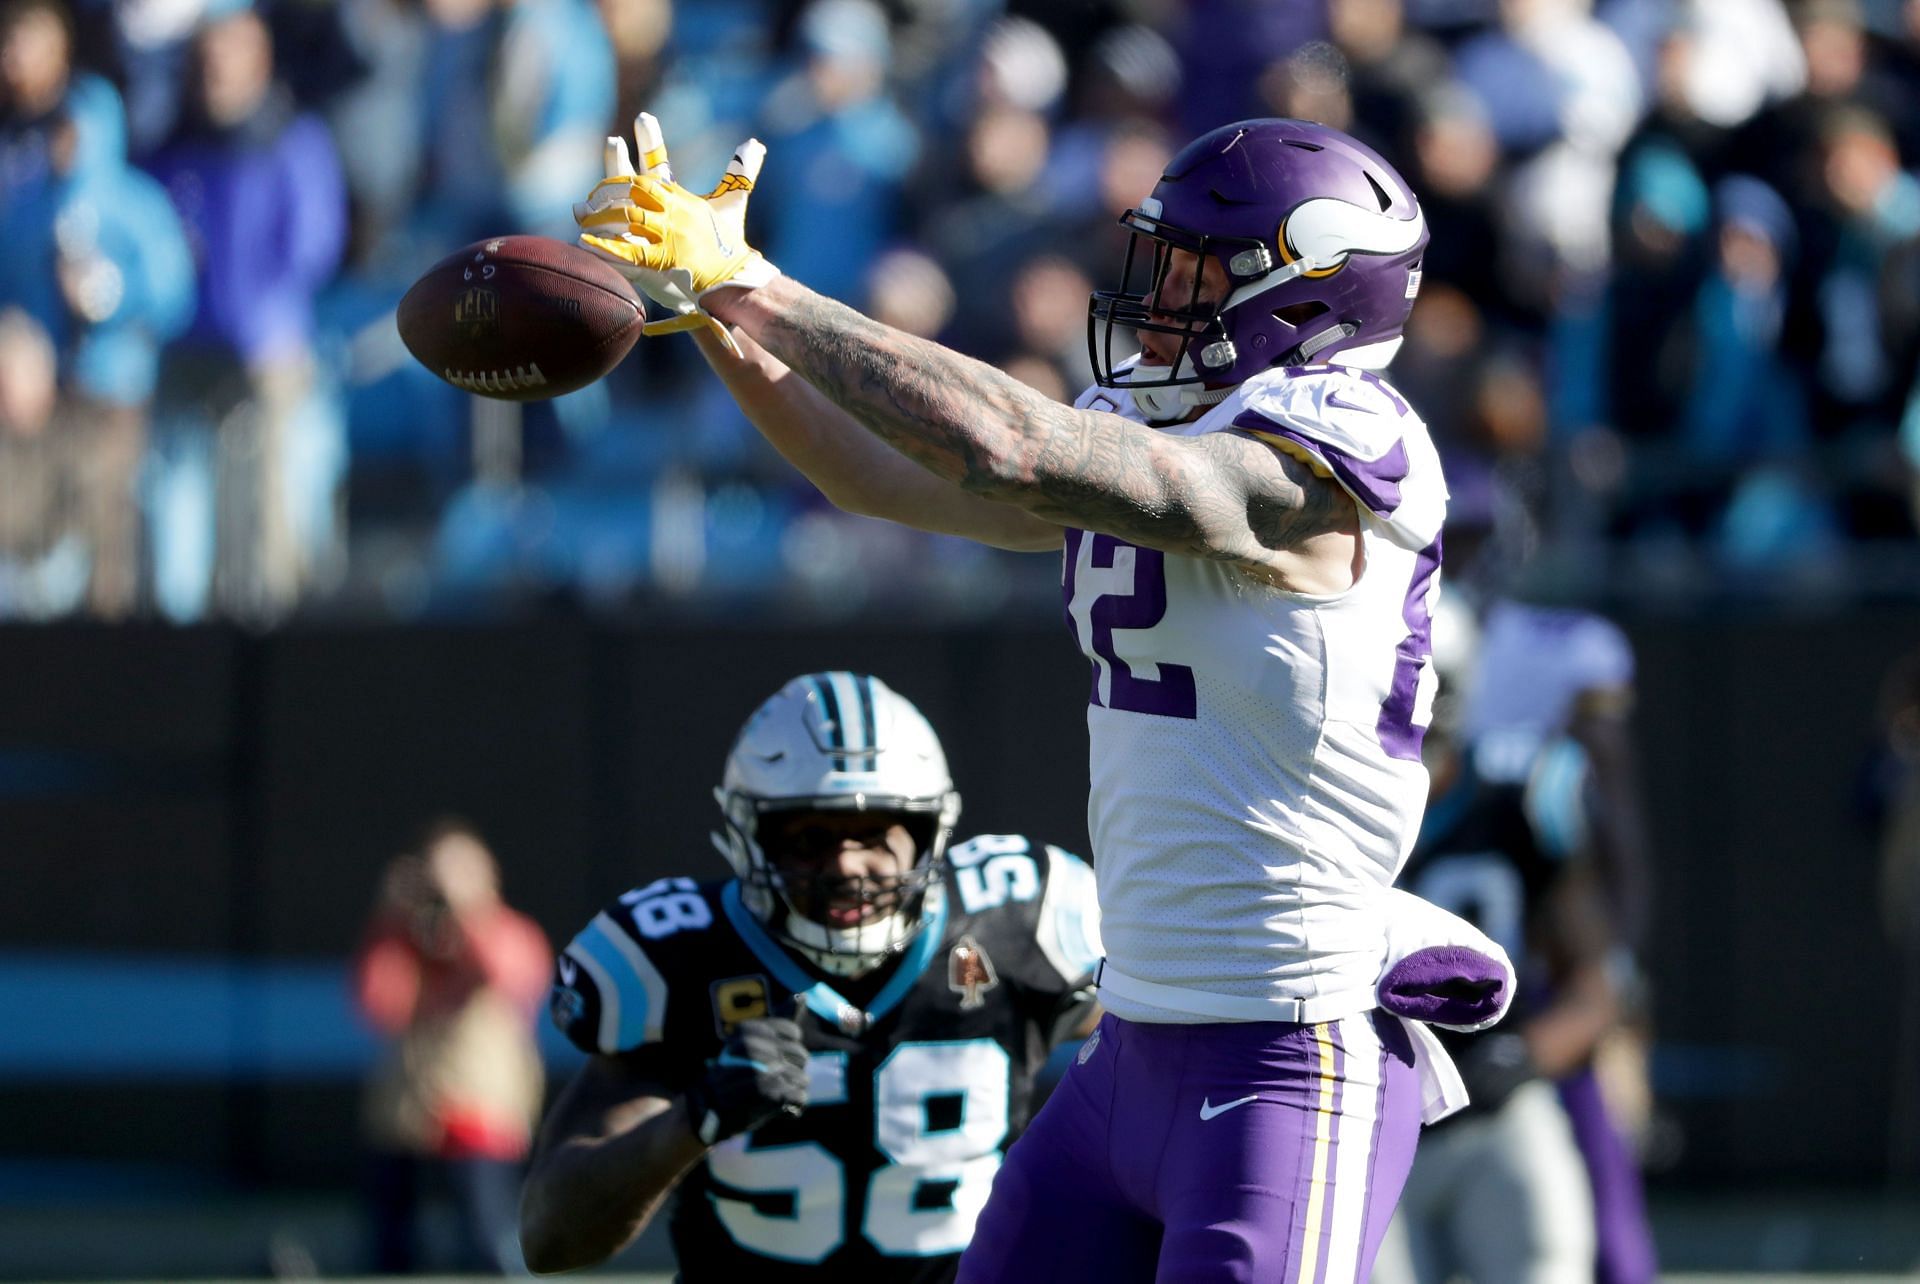 Rudolph goes up for a pass against Carolina in 2017 (Photo: Getty)